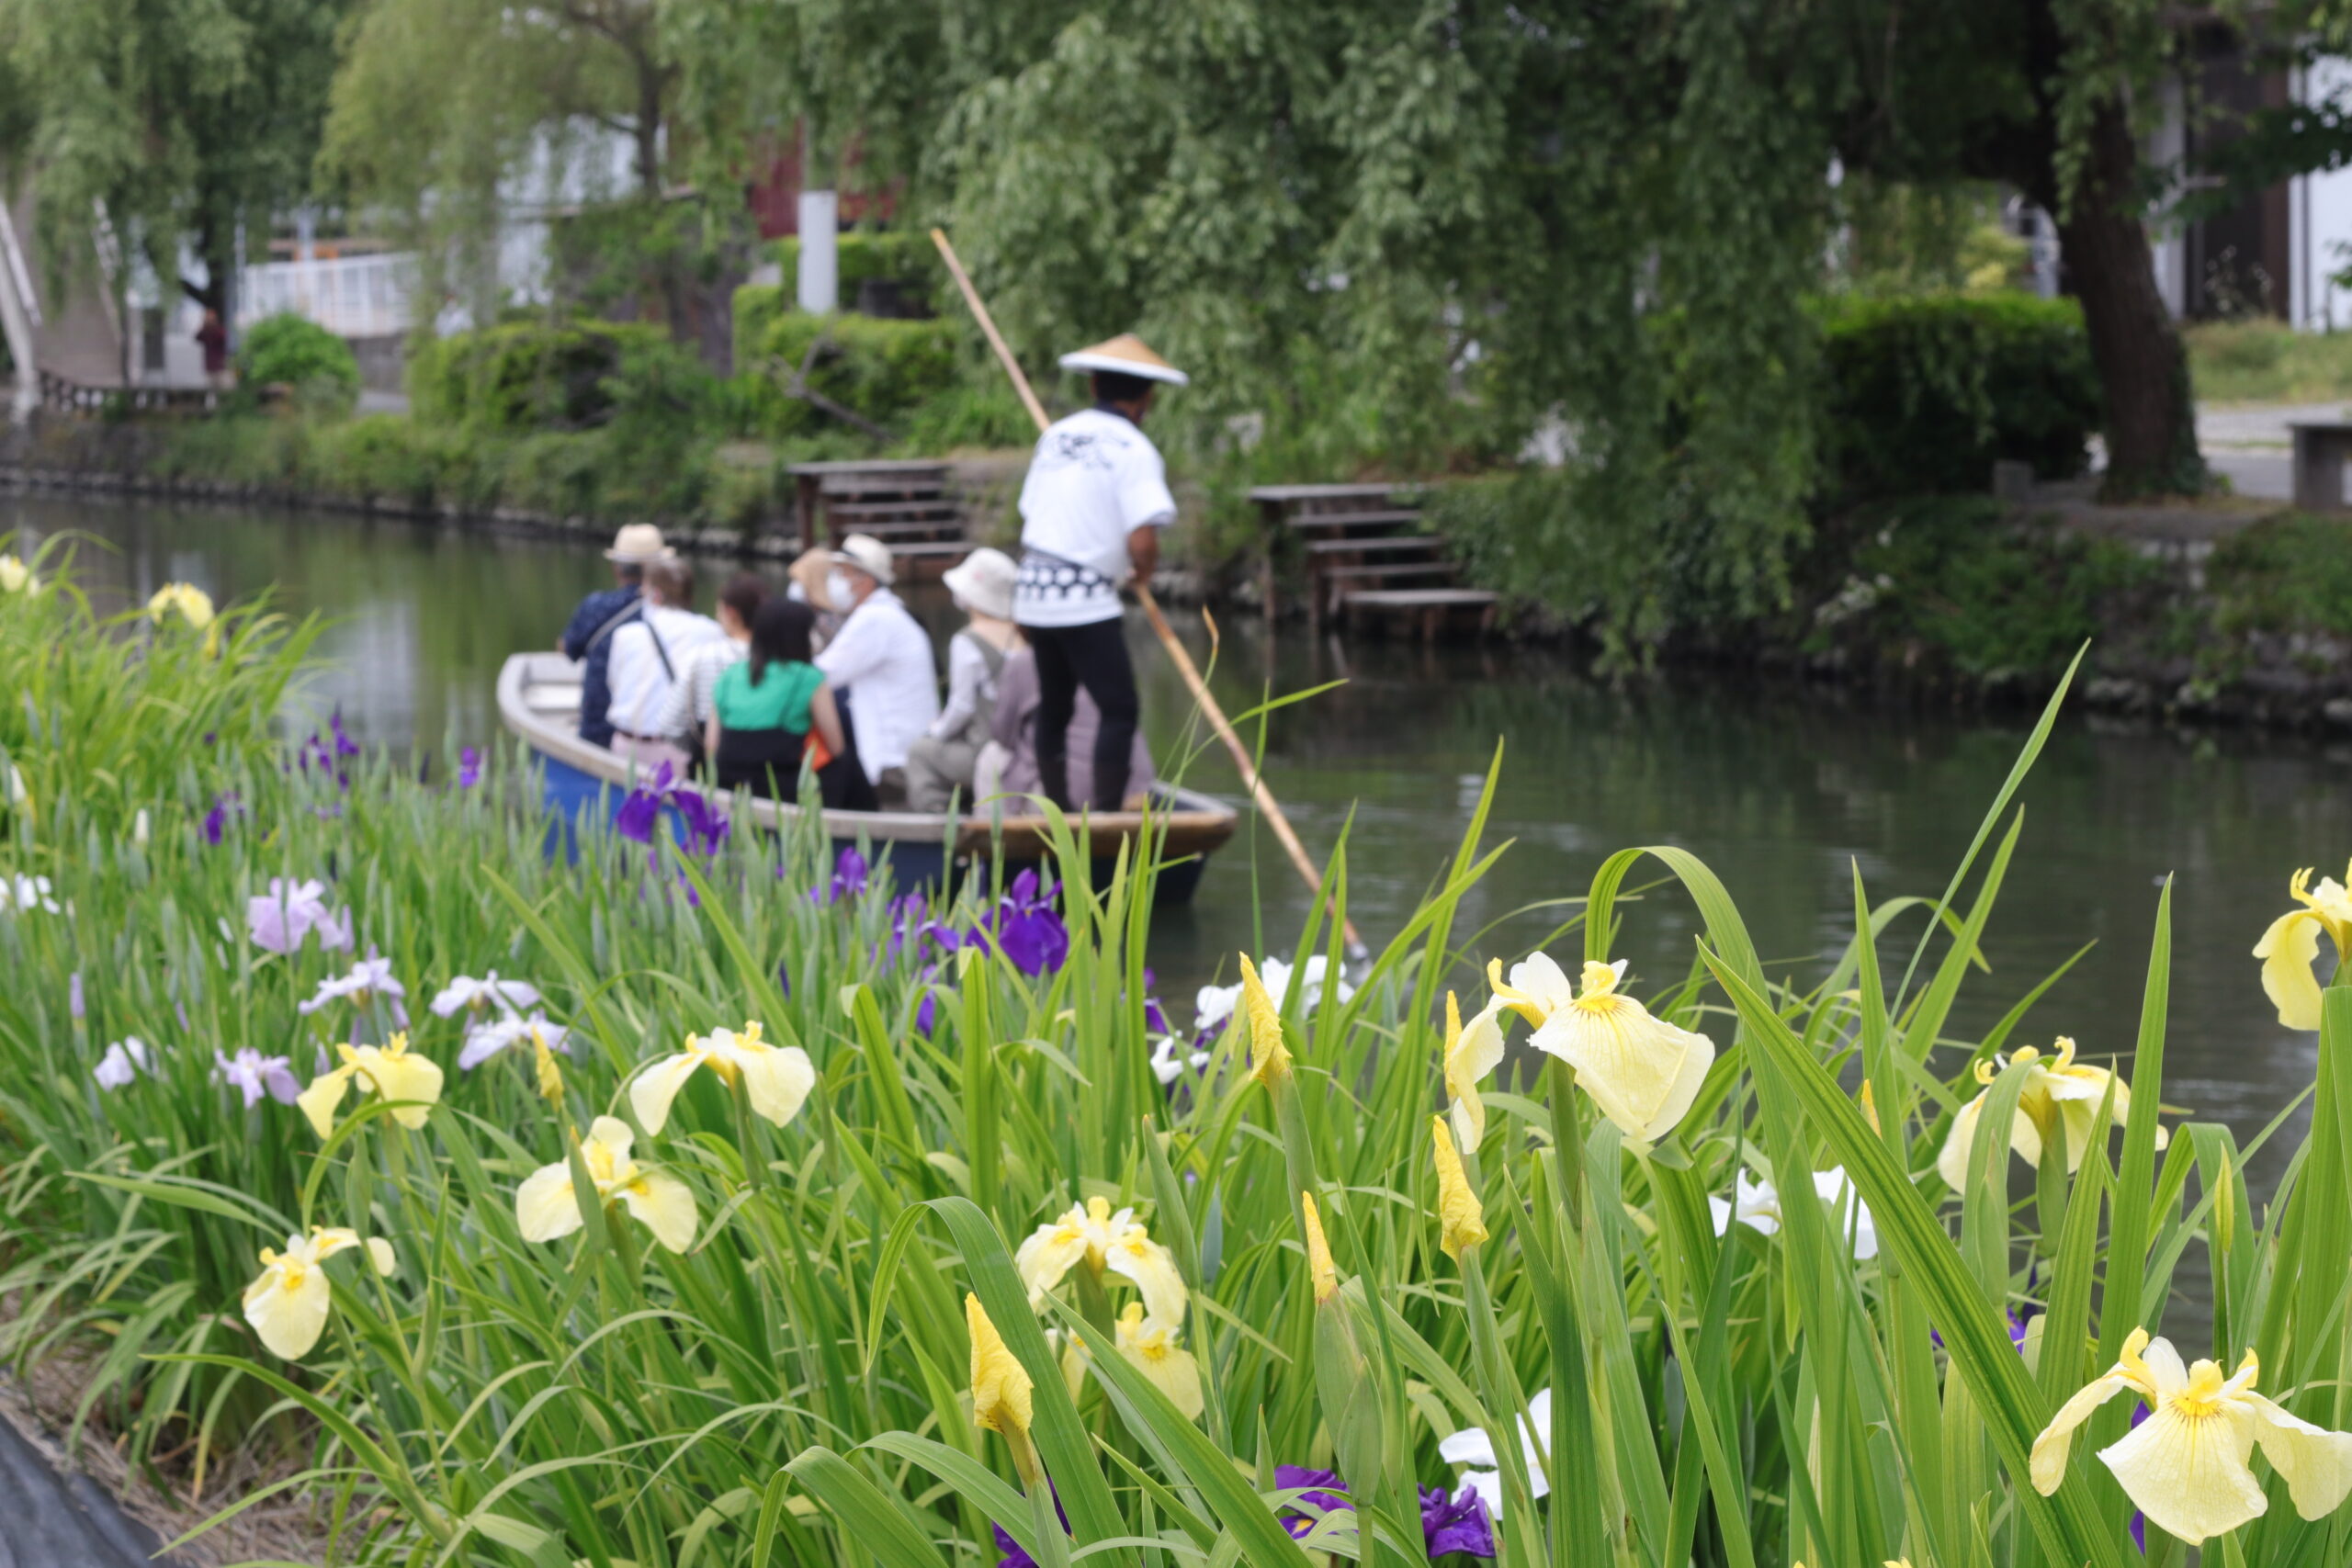 yanagawa:"Introducing Recommended Plans for Yanagawa River Cruise Tourist Spots - From Half-Day (Day Trips) to Overnight Stays"